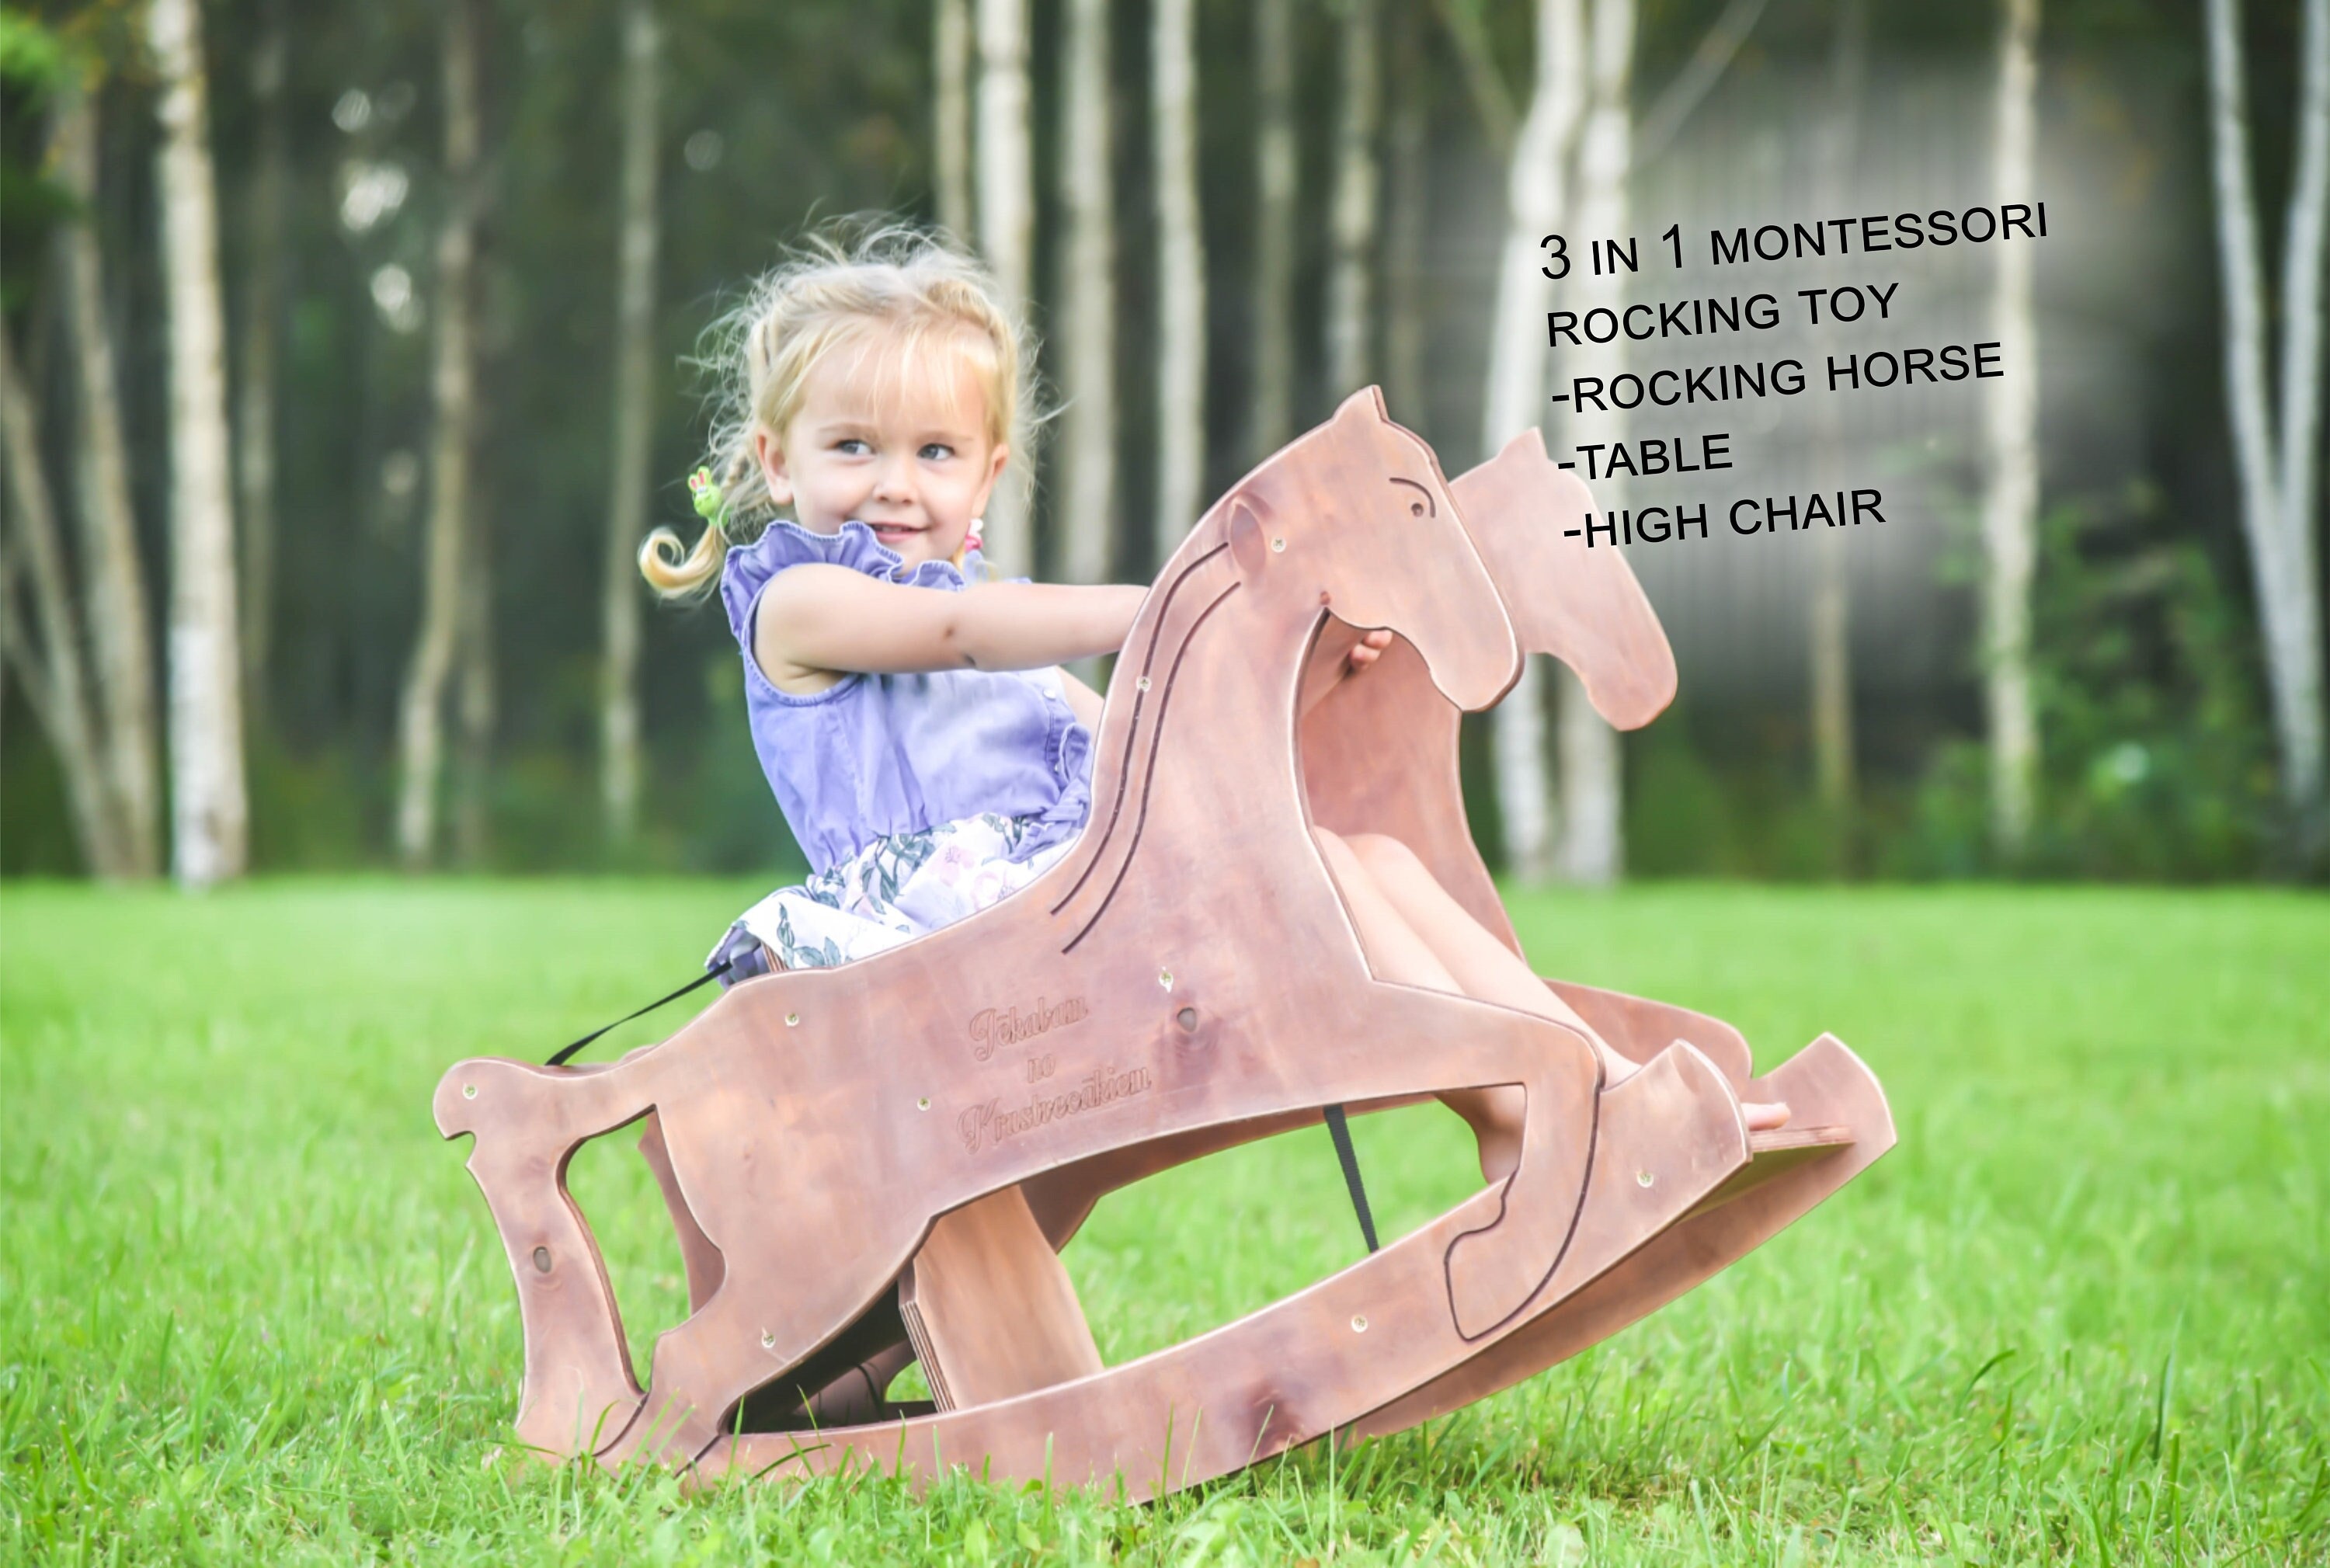 Baby Feeding Chair Seat Infant Dining Table Rocking Horse Toddler Riding Rocker